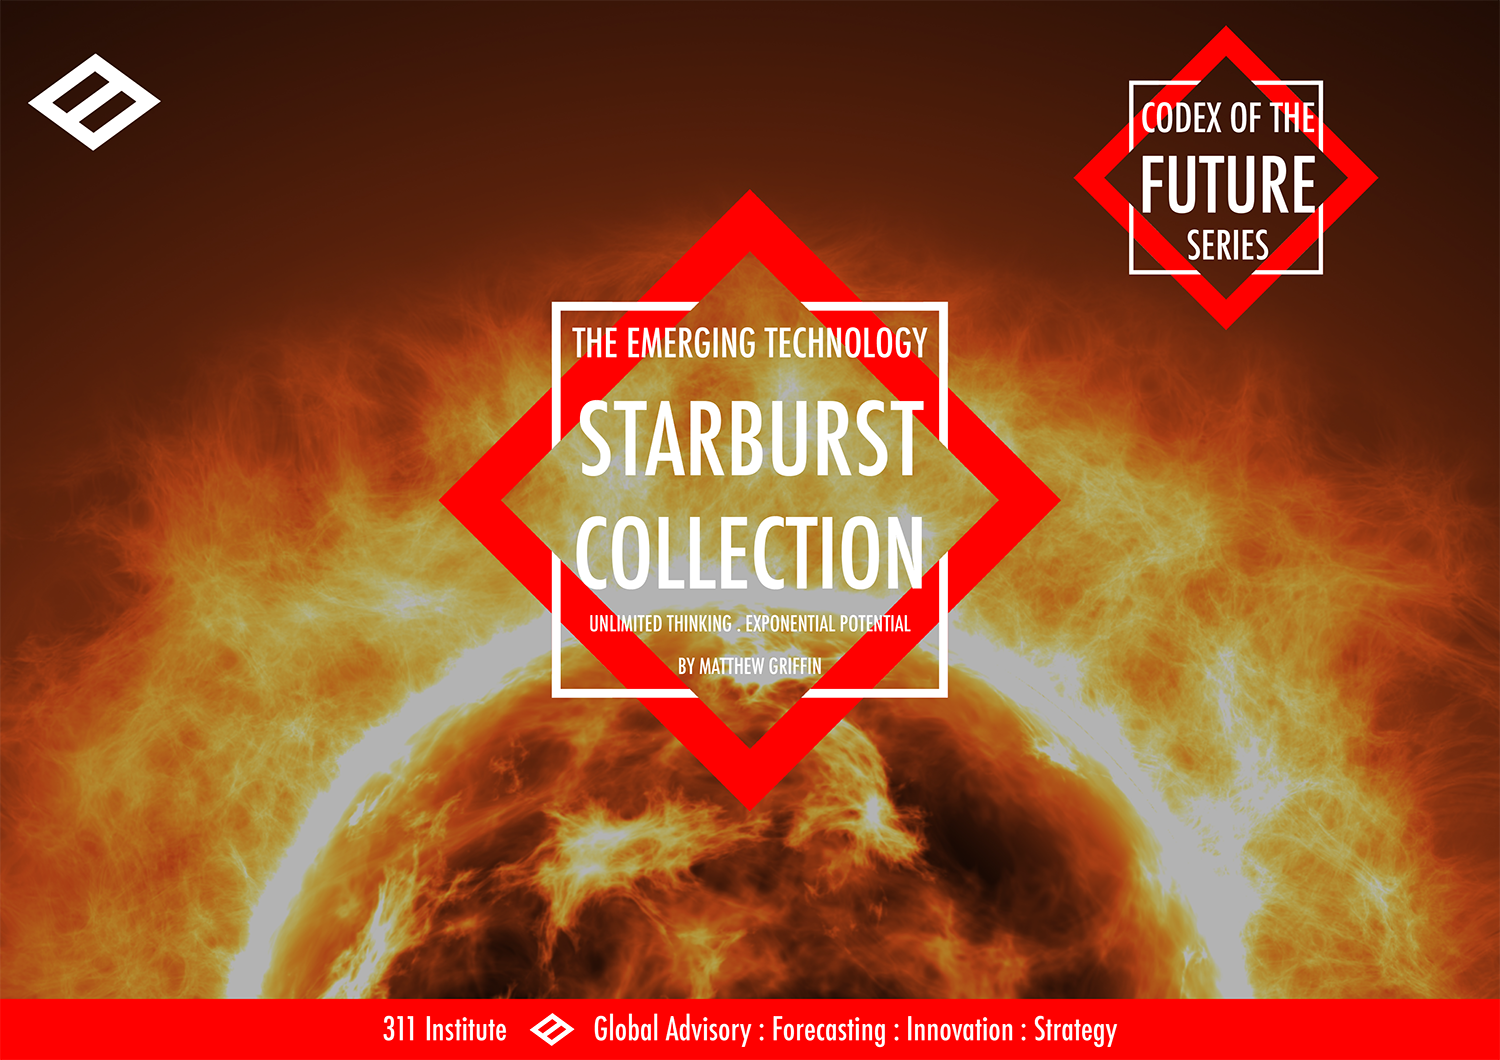 The Emerging Technology Starburst Collection